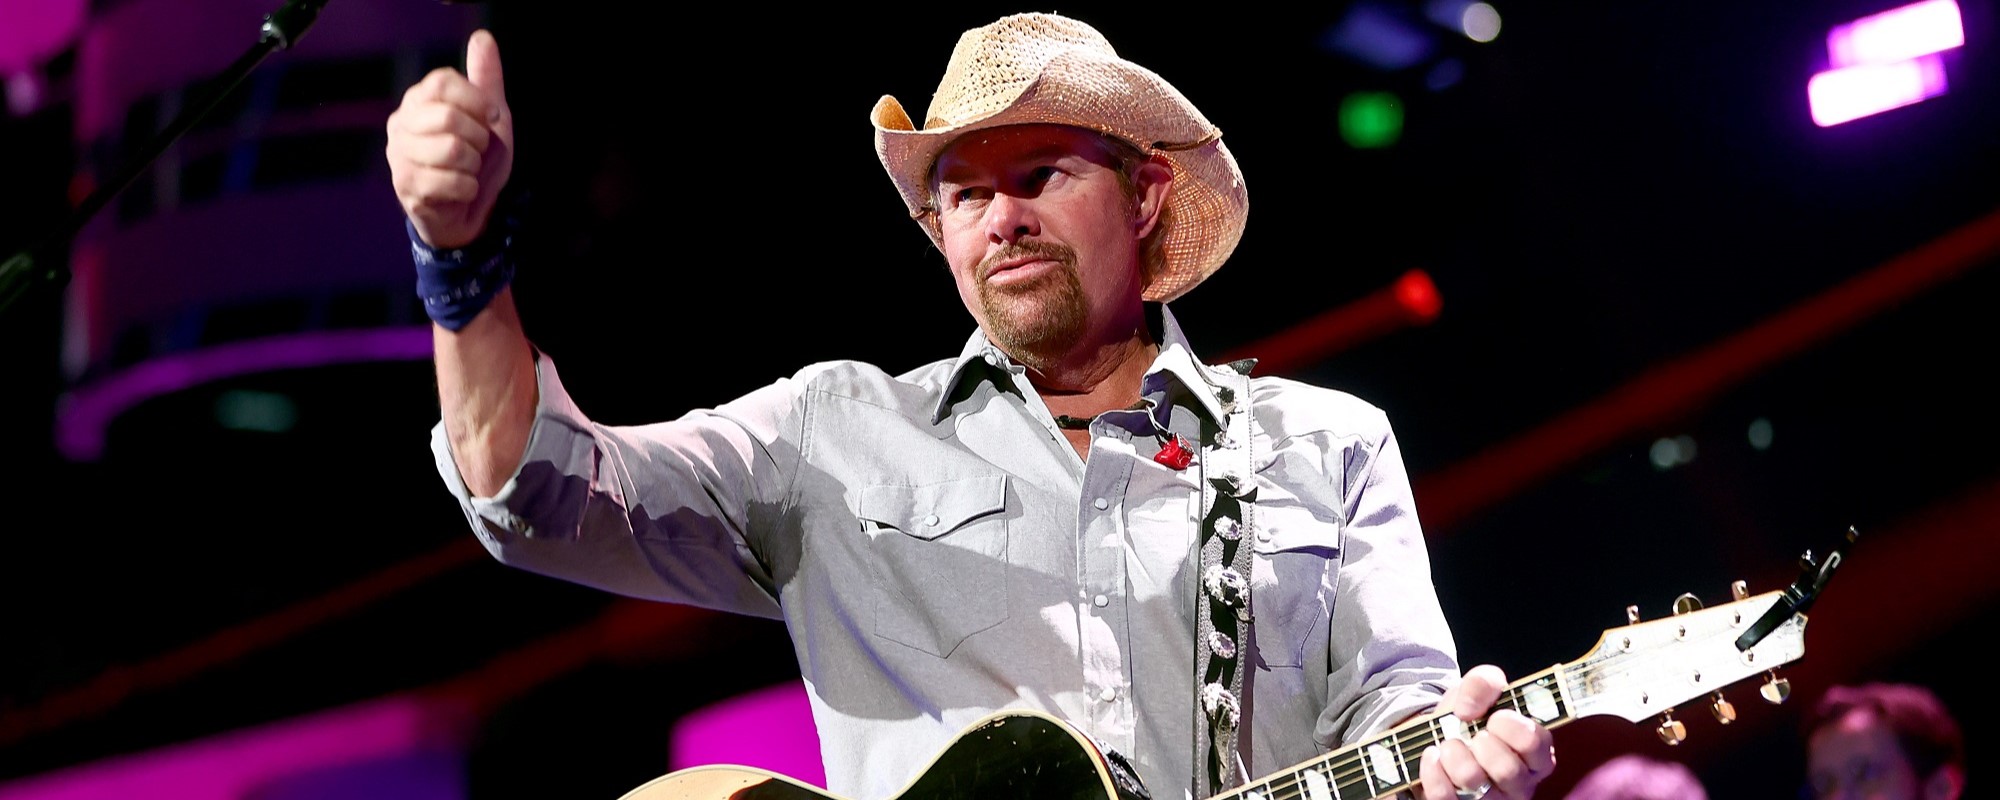 Country Music Hall of Fame and More Pay Homage to Toby Keith: “We Are Heartbroken by [His] Passing”